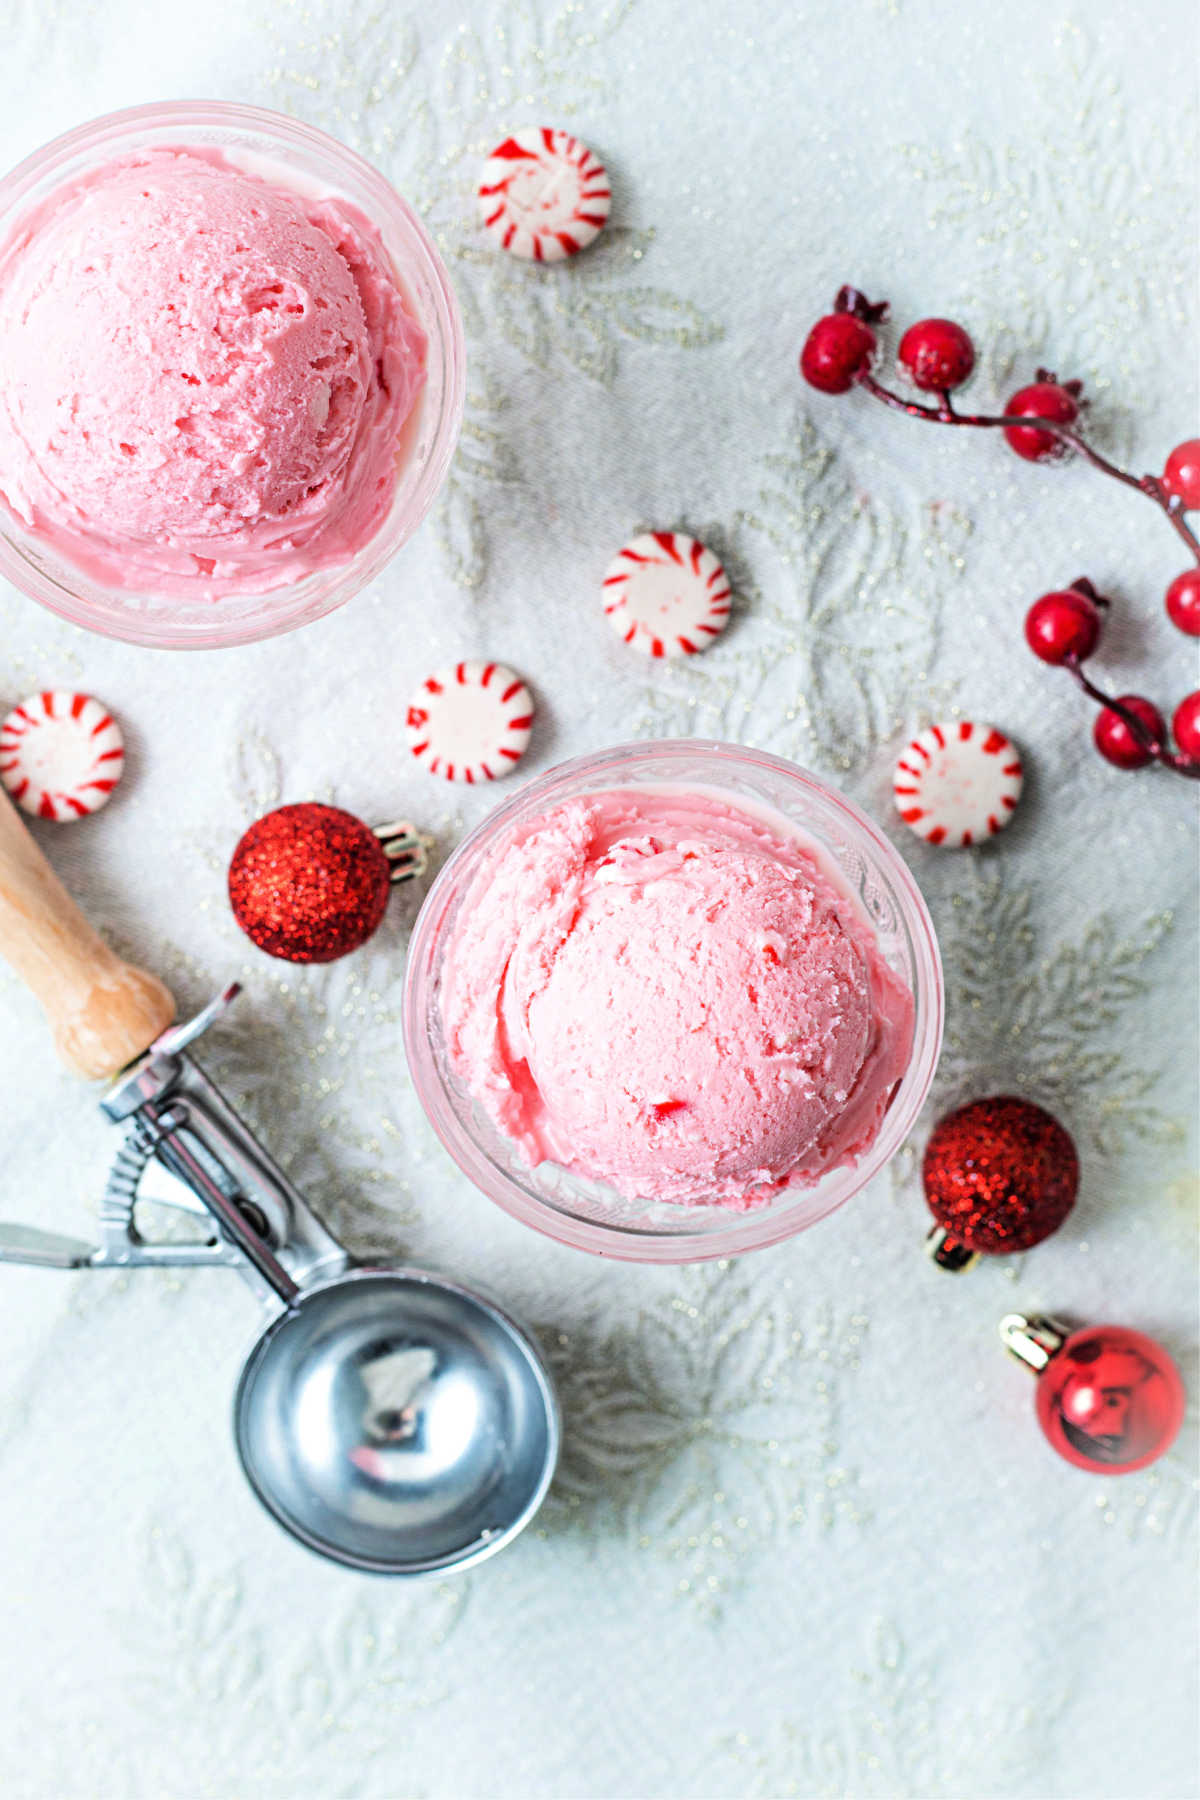 top down view of scoops of peppermint ice cream in two vintage cut glass ice cream bowls on a table with peppermints and an ice cream scoop.